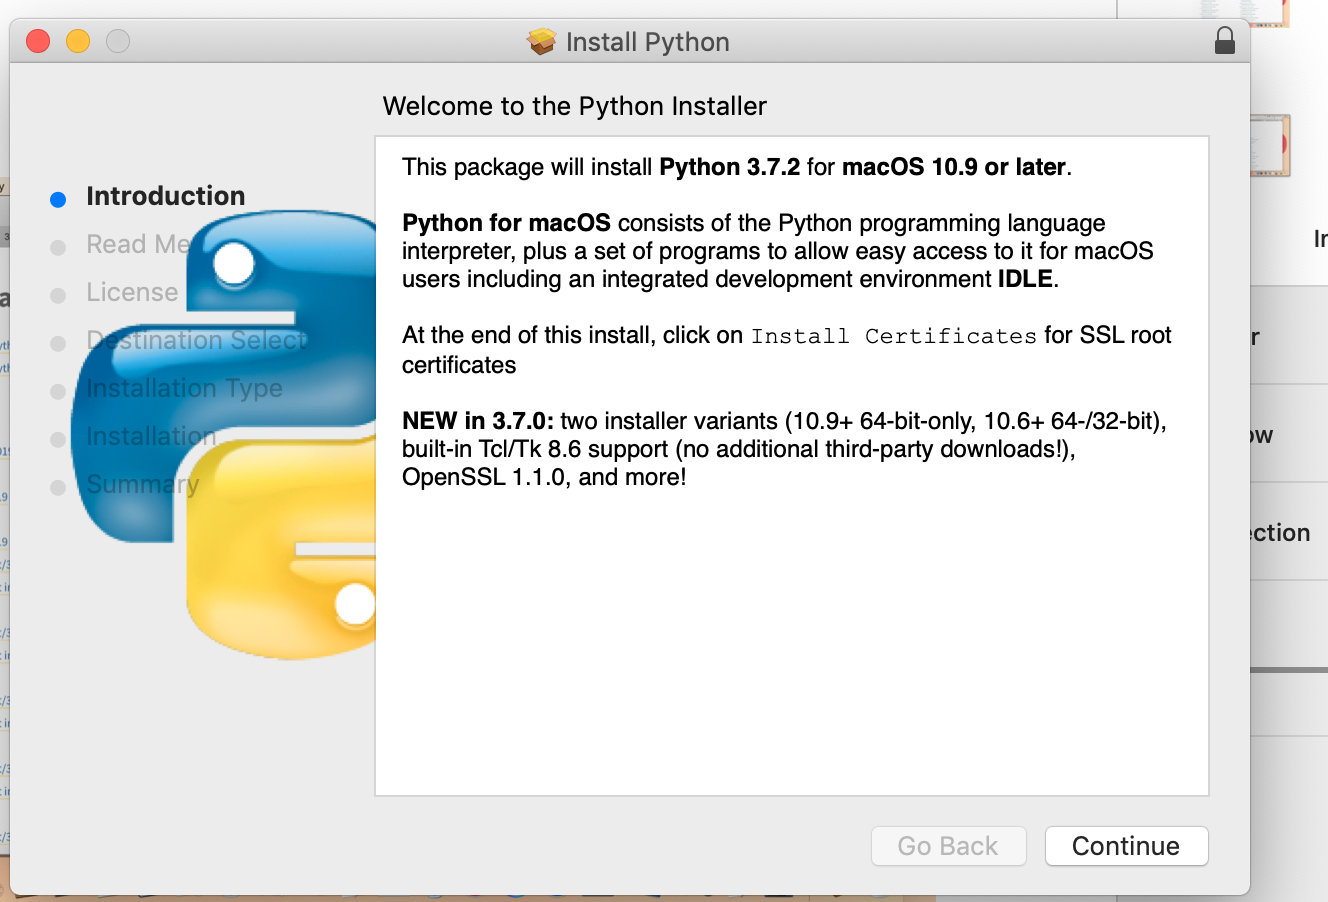 Download Python For Mac 10.9